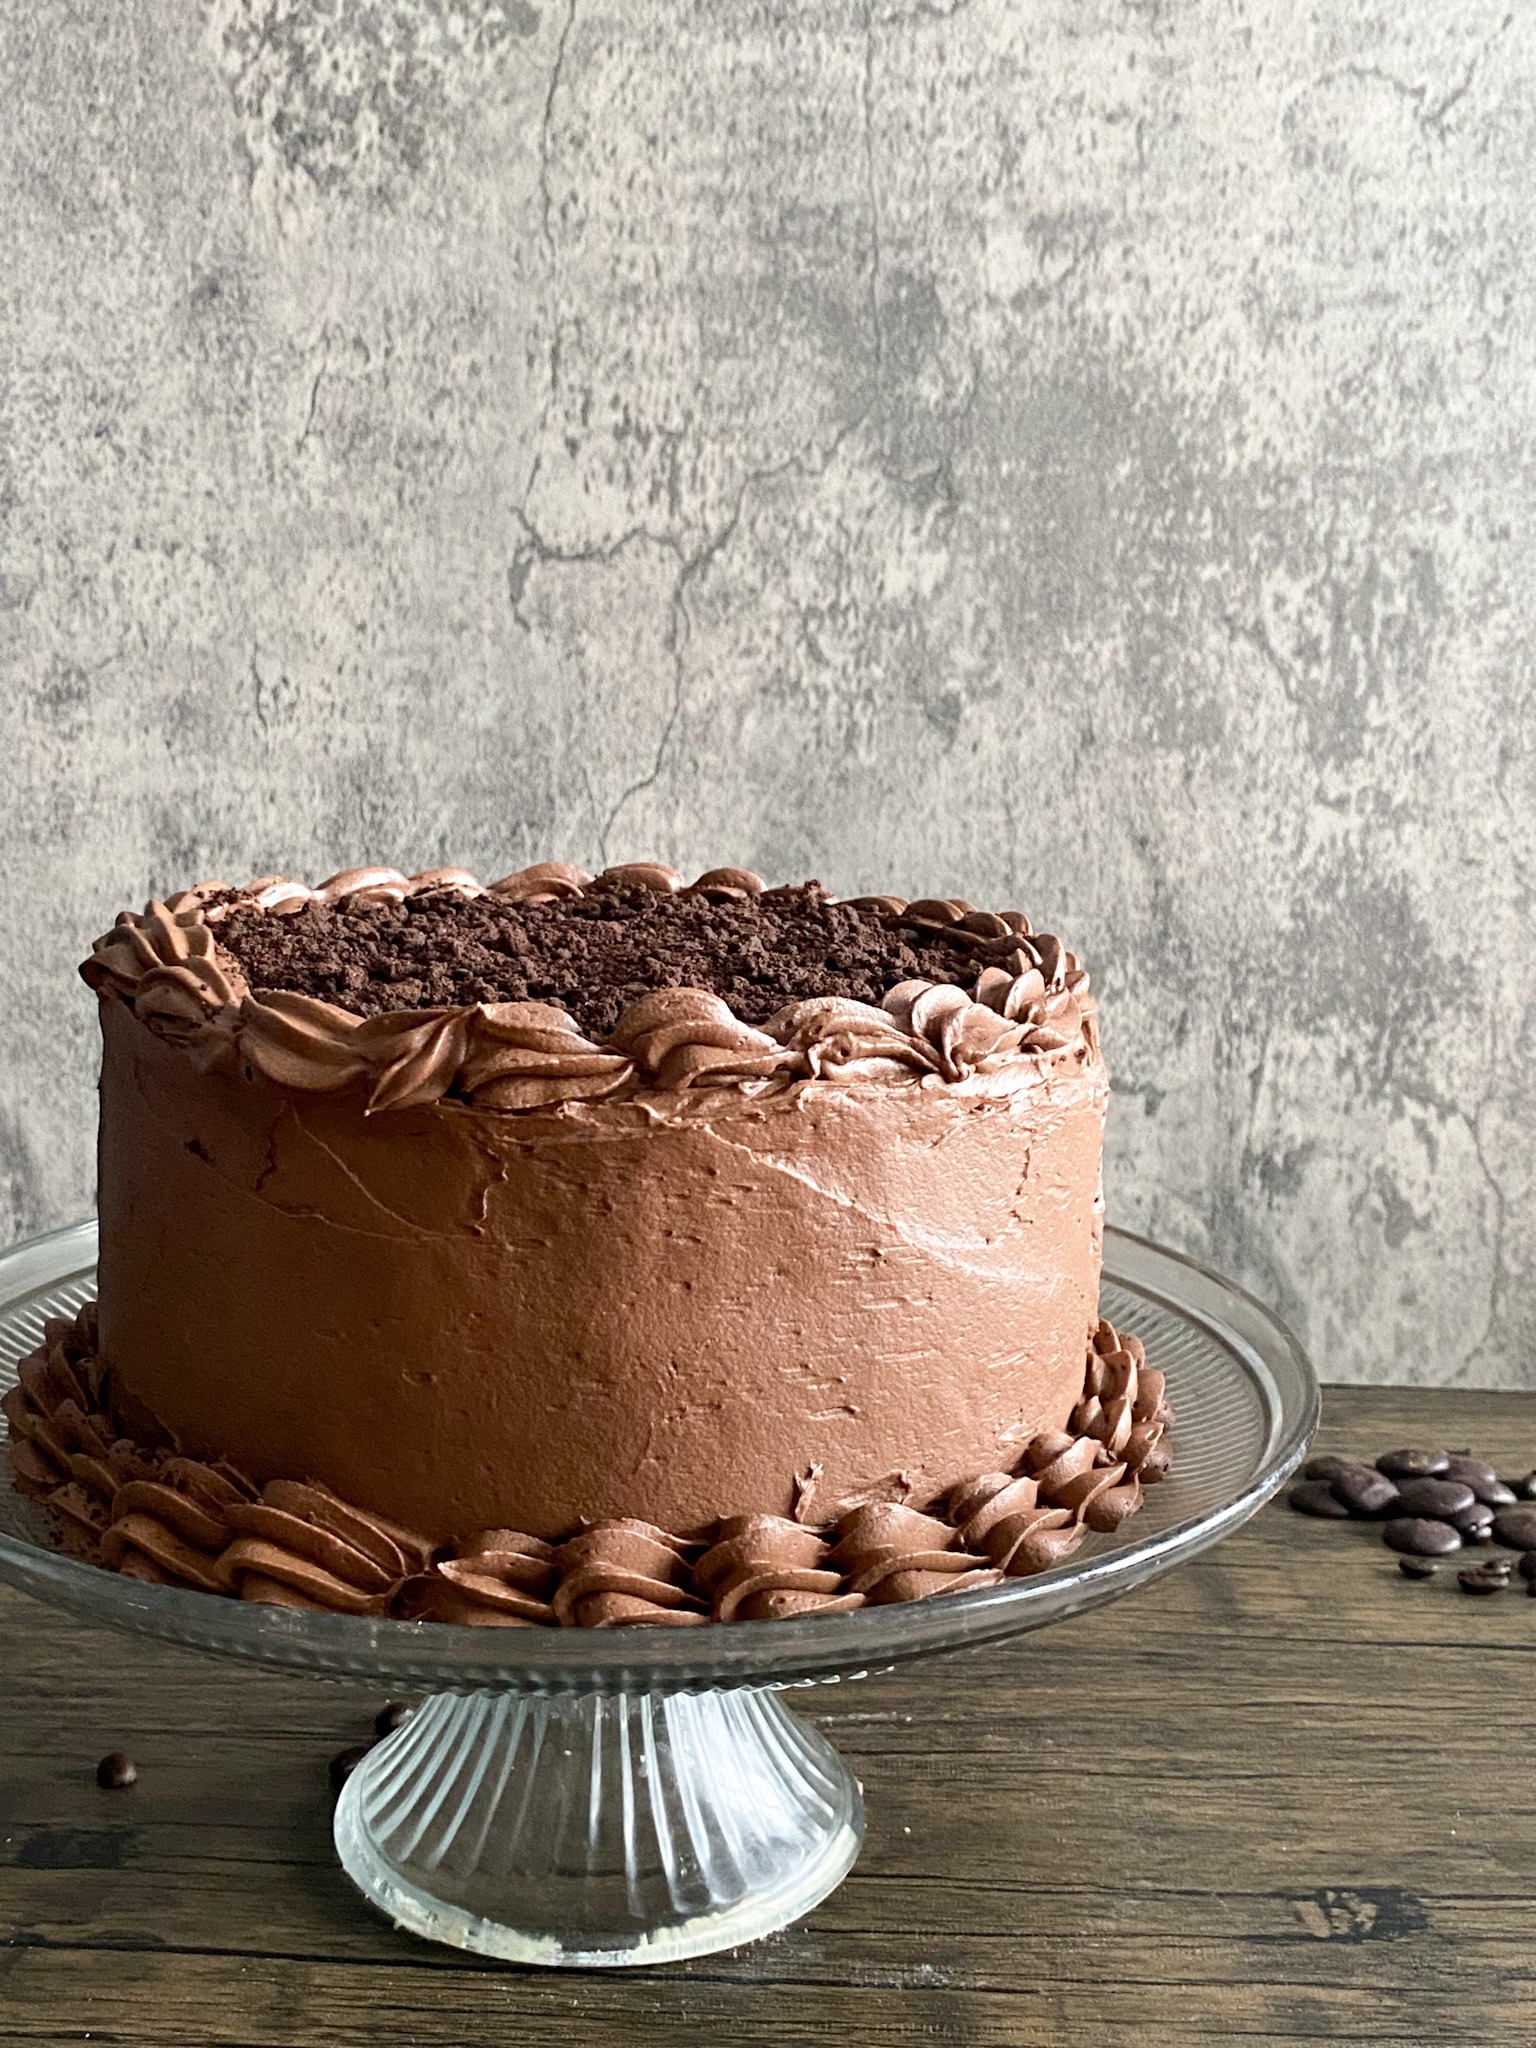 a chocolate layer cake sits on a glass cake stand on a wooden surface with a speckledgrey background